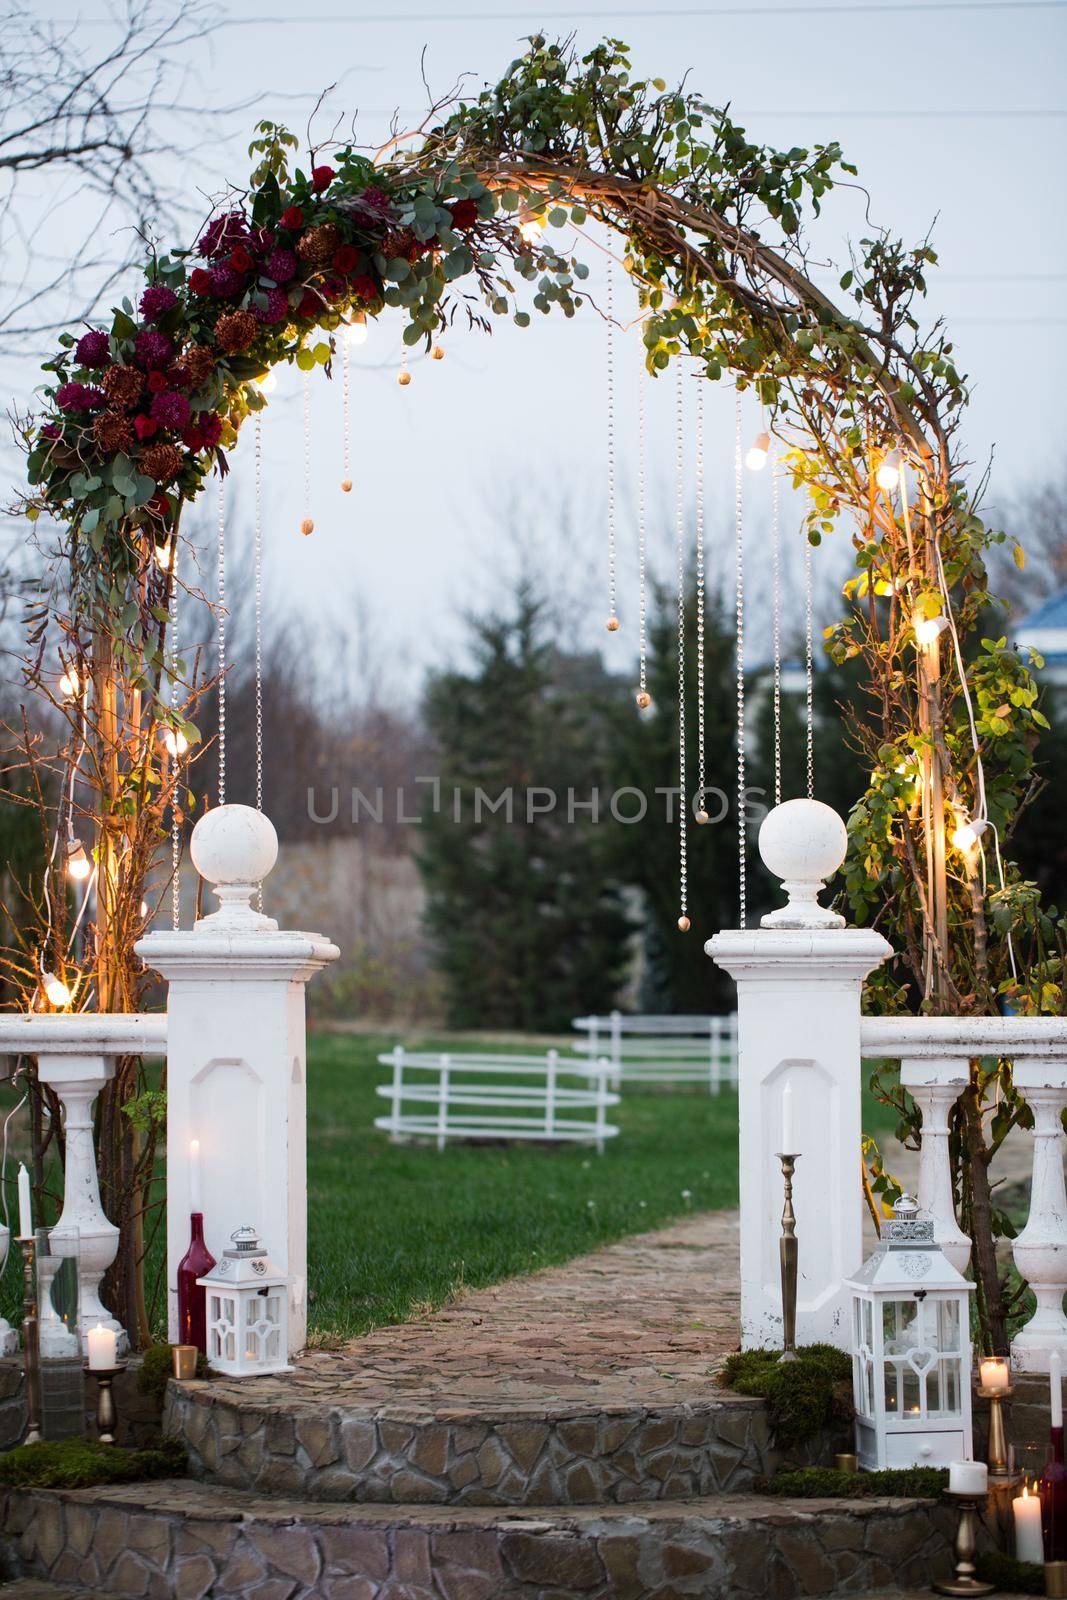 Wedding arch in an ancient park at sunset. by StudioPeace